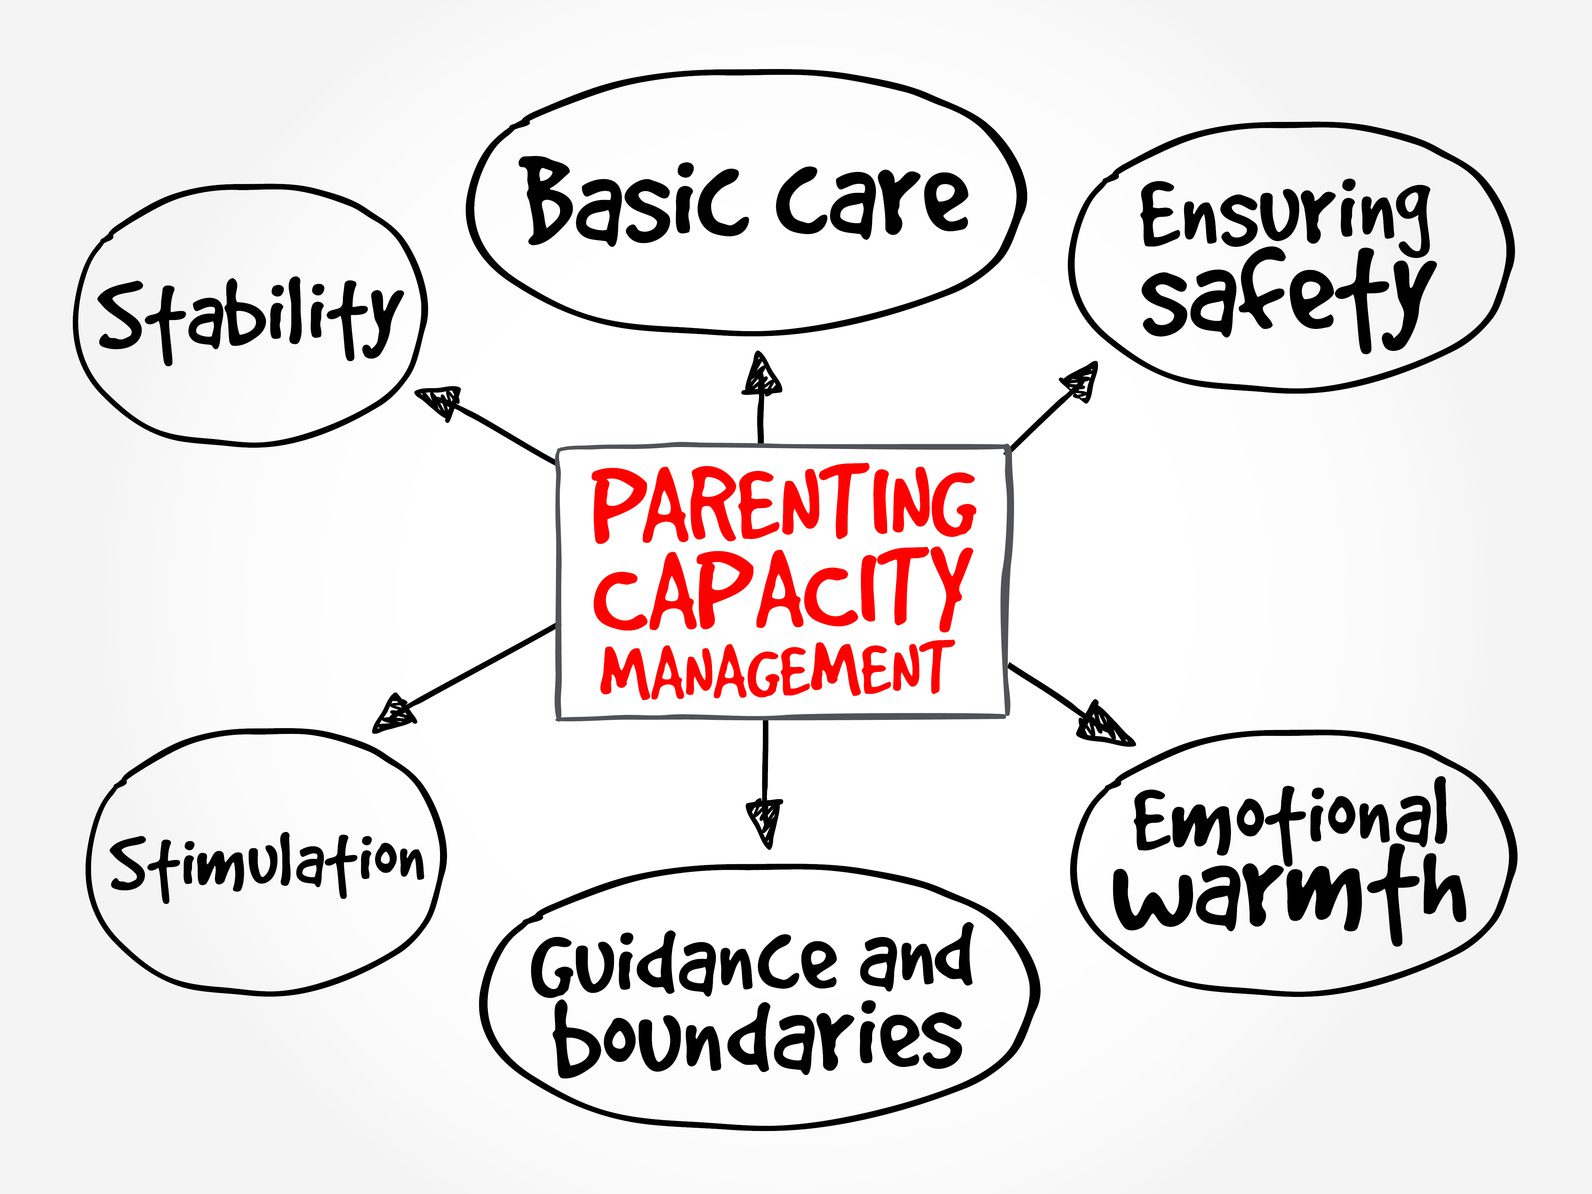 Why Should I Develop a Parenting Plan?